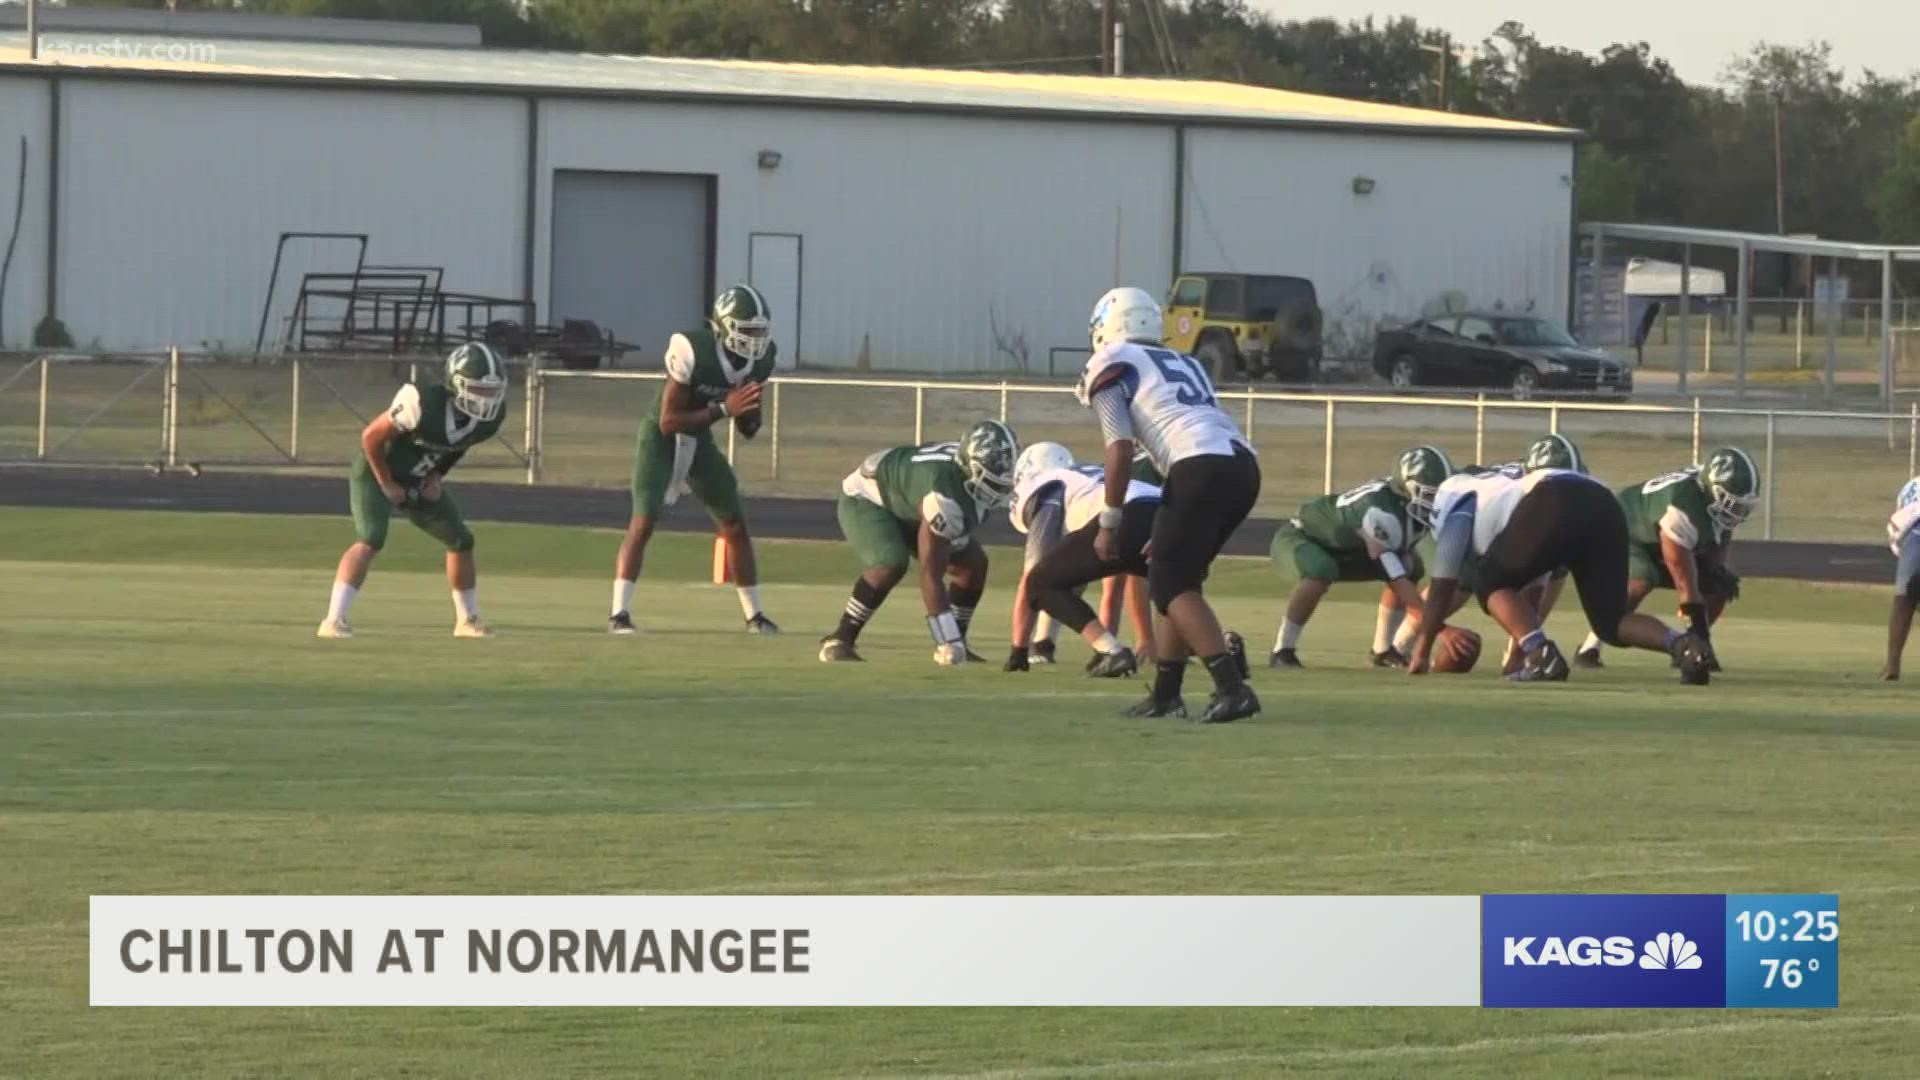 Check out all the highlights and scores from Week 3 of FNL action.